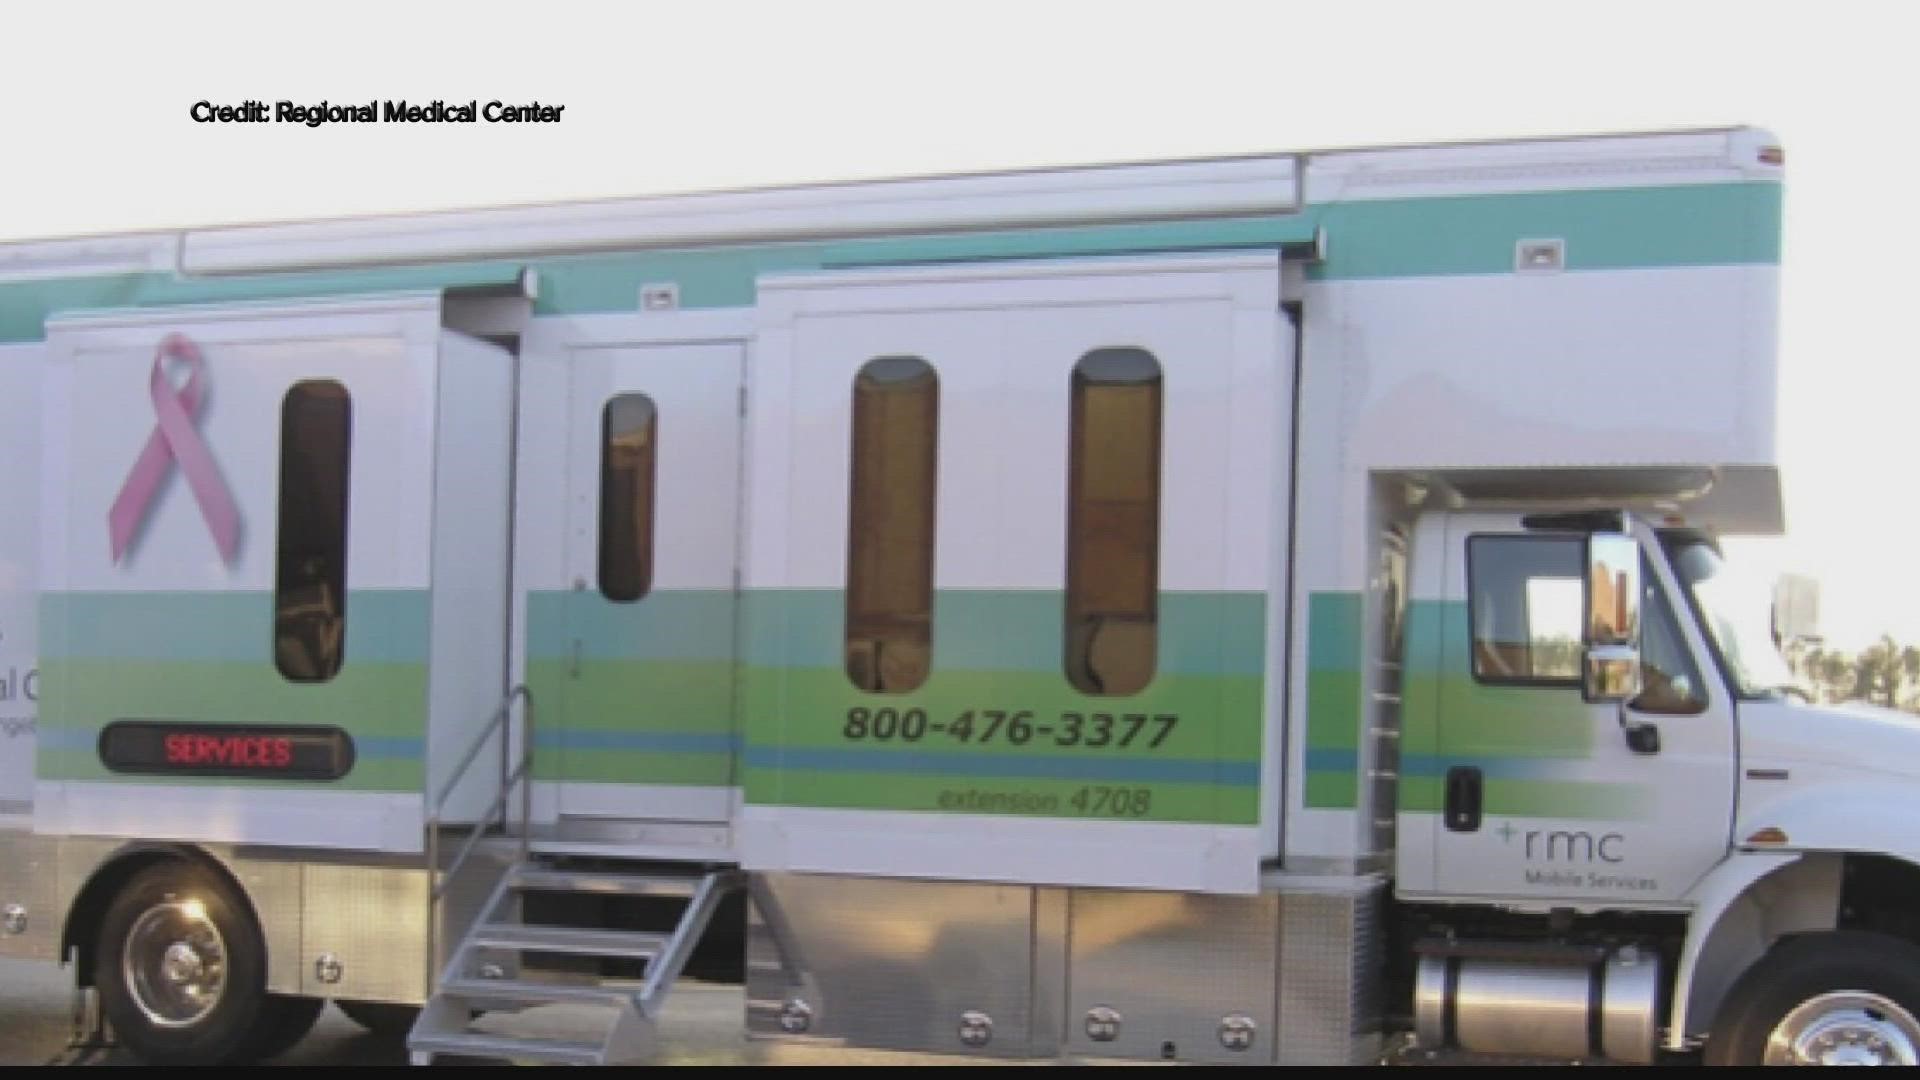 The mobile mammography truck makes stops at the Santee Urgent care facility on the fourth Monday of every month.